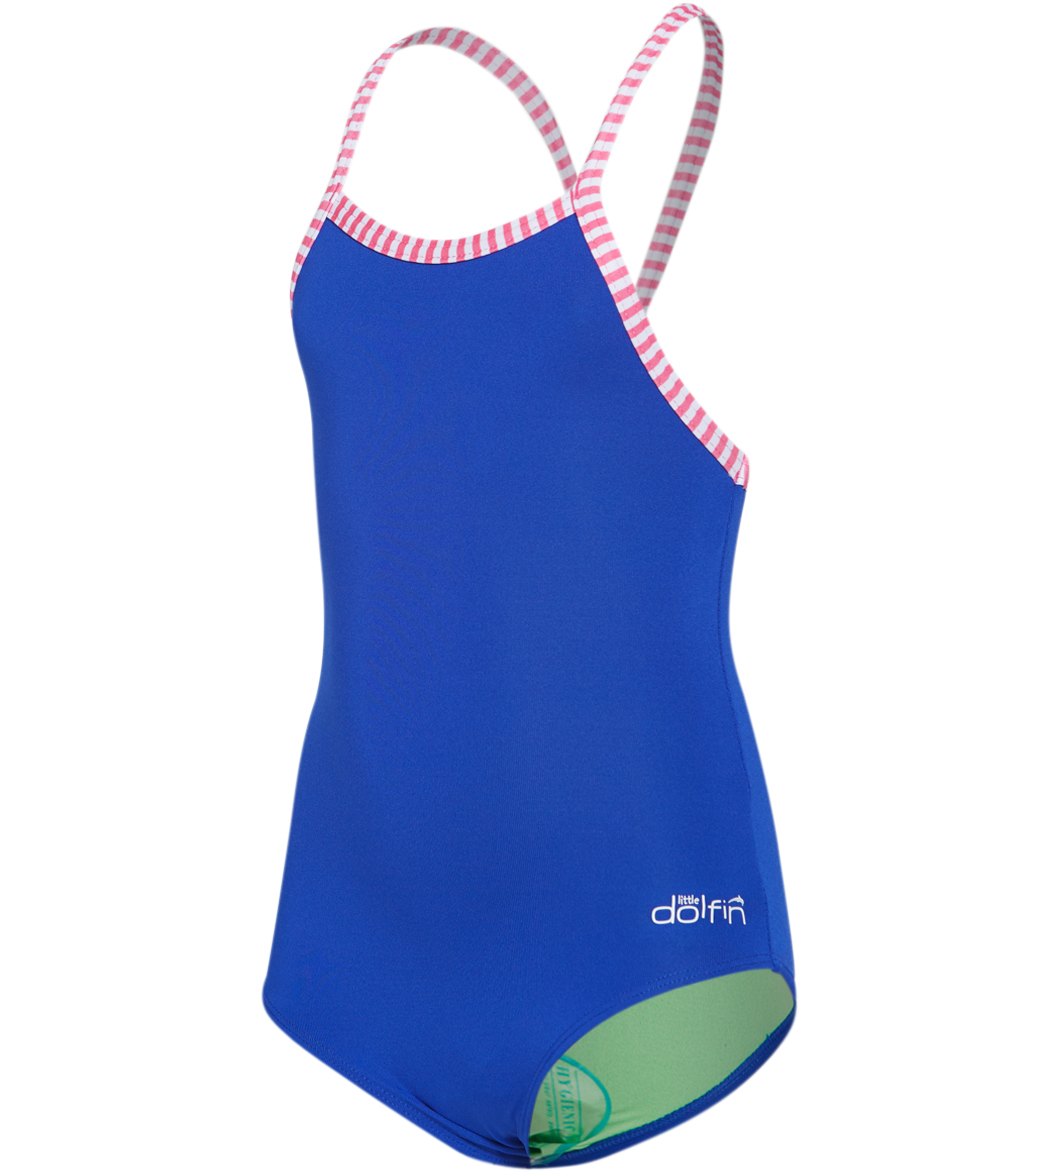 Dolfin Toddler Girls' Solid One Piece Swimsuit 2T-6X - Blue 3T - Swimoutlet.com